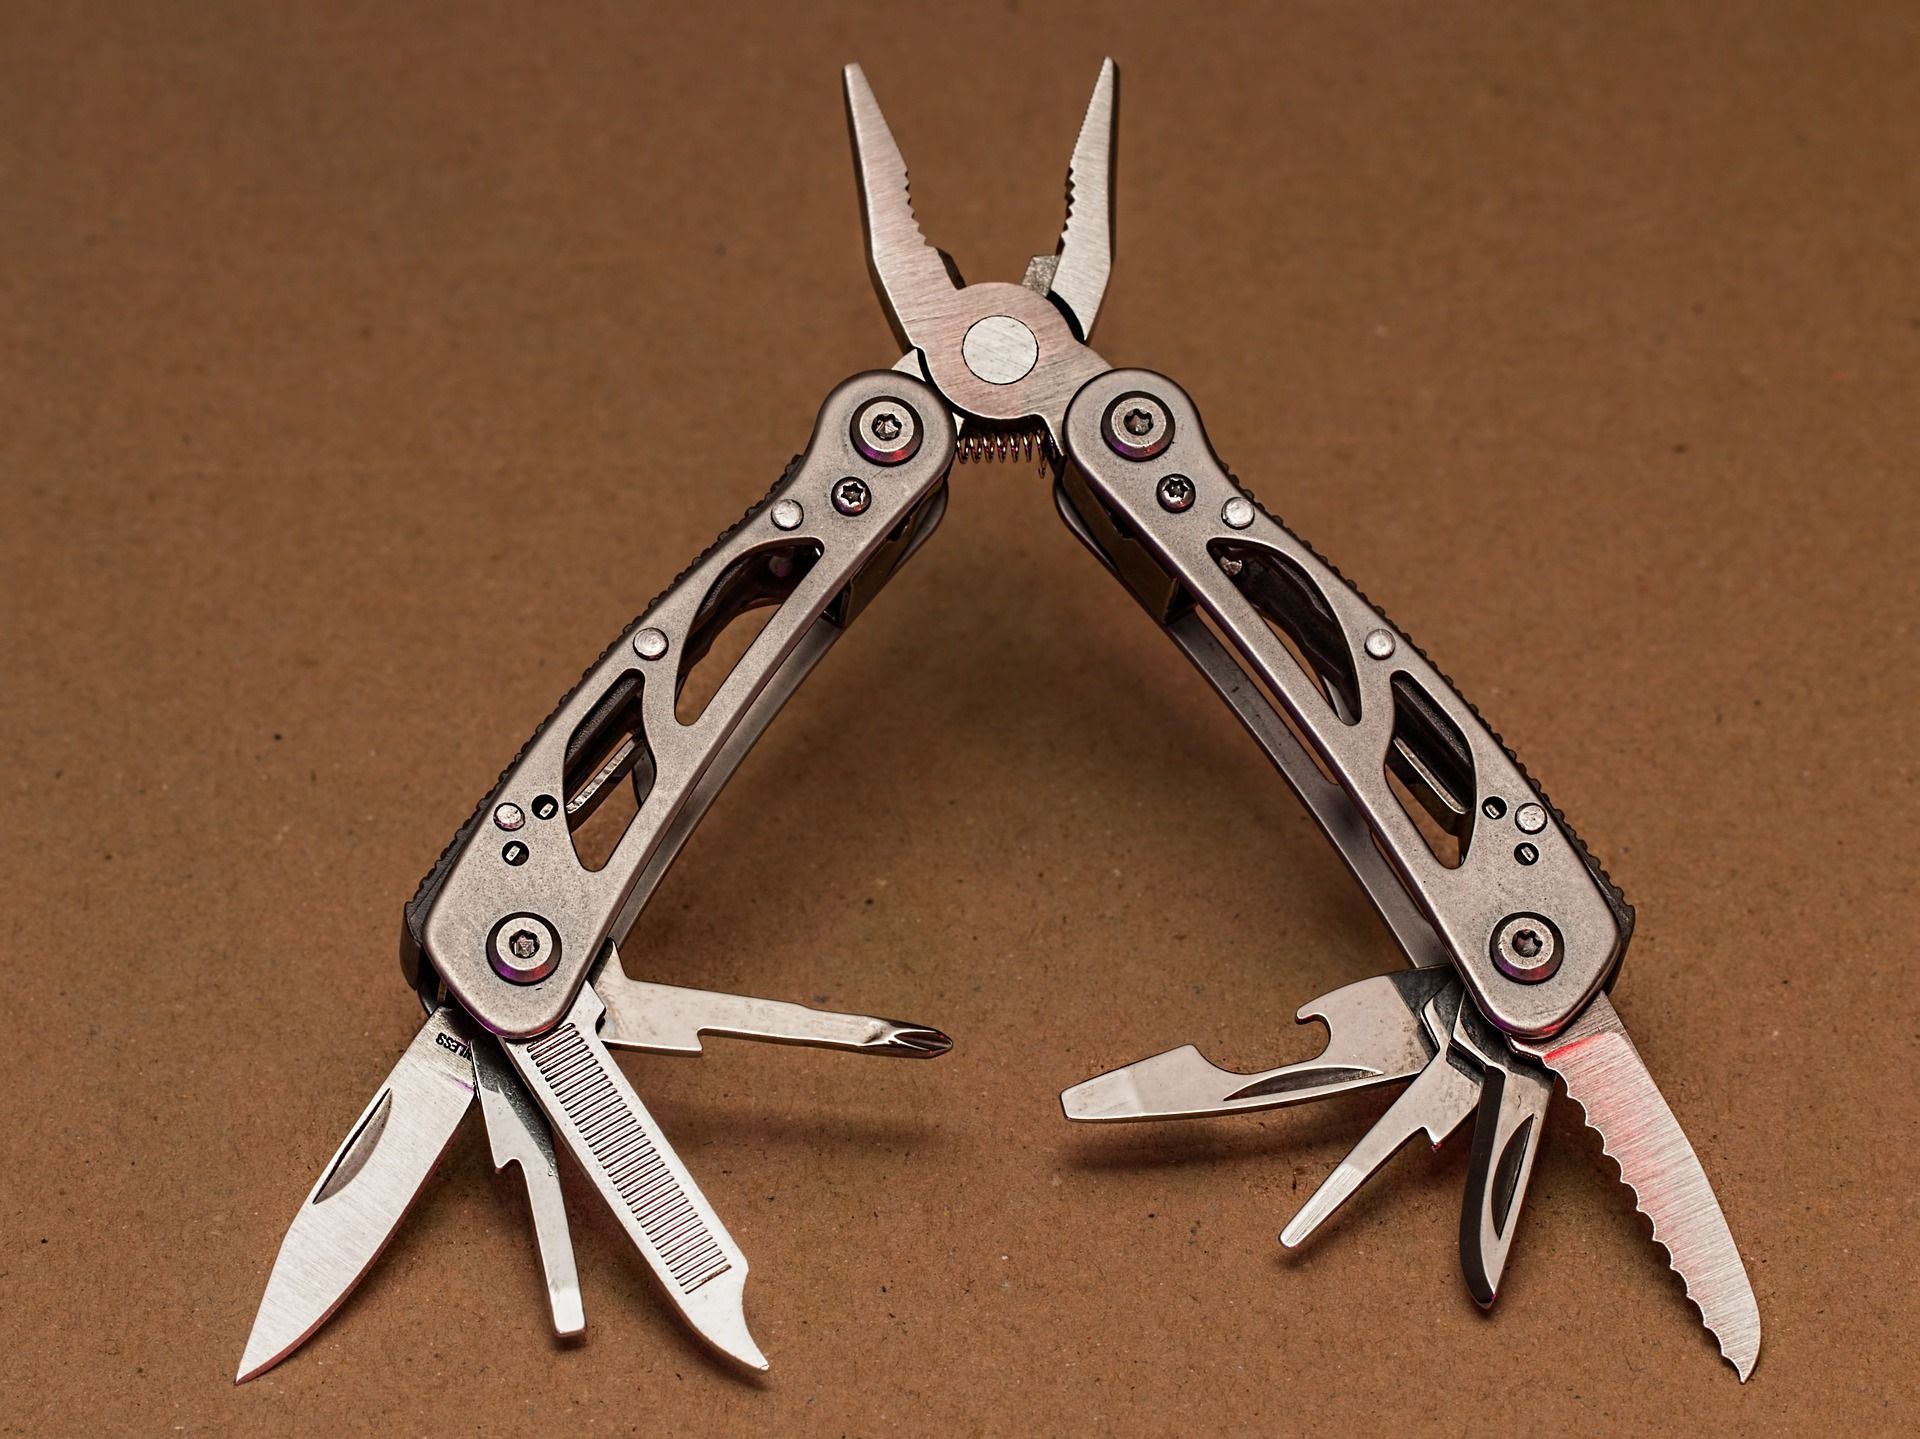 Best Multitool For Electricians 2021, Leatherman For Electricians